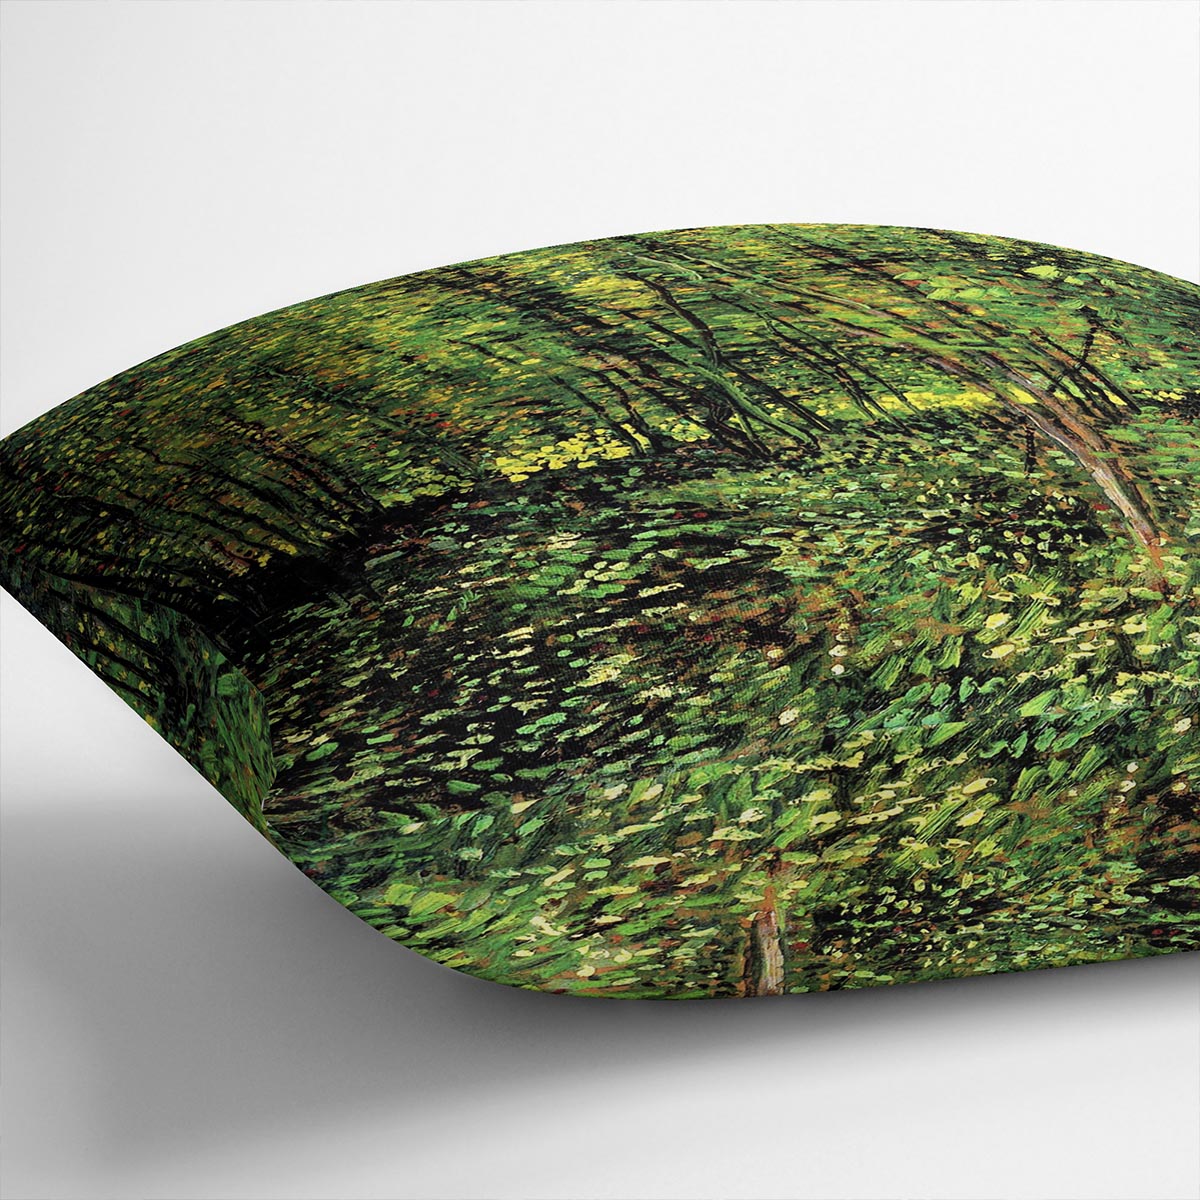 Trees and Undergrowth 2 by Van Gogh Cushion